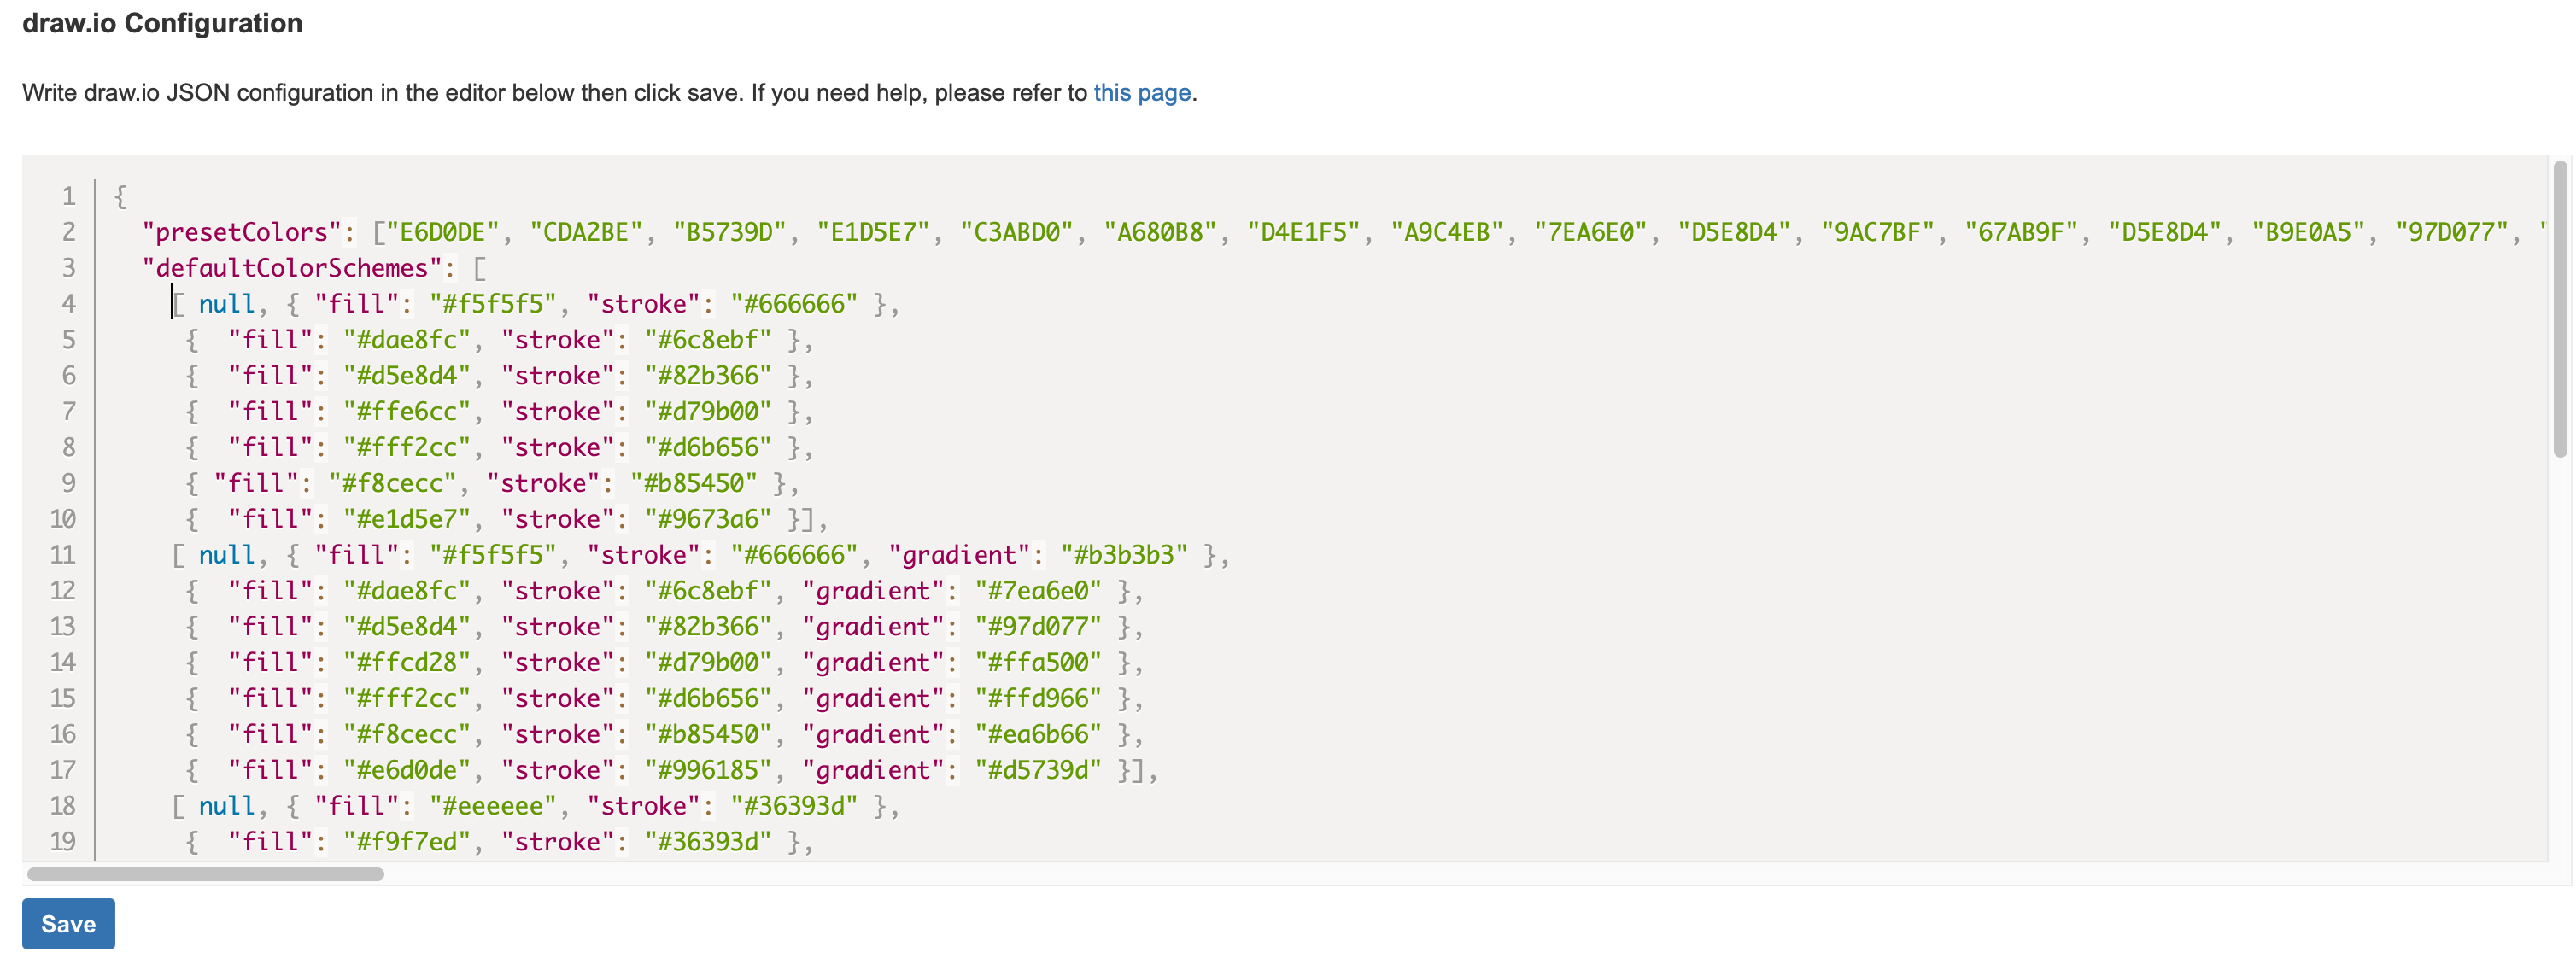 Changing the default colour palettes in draw.io for Confluence Cloud